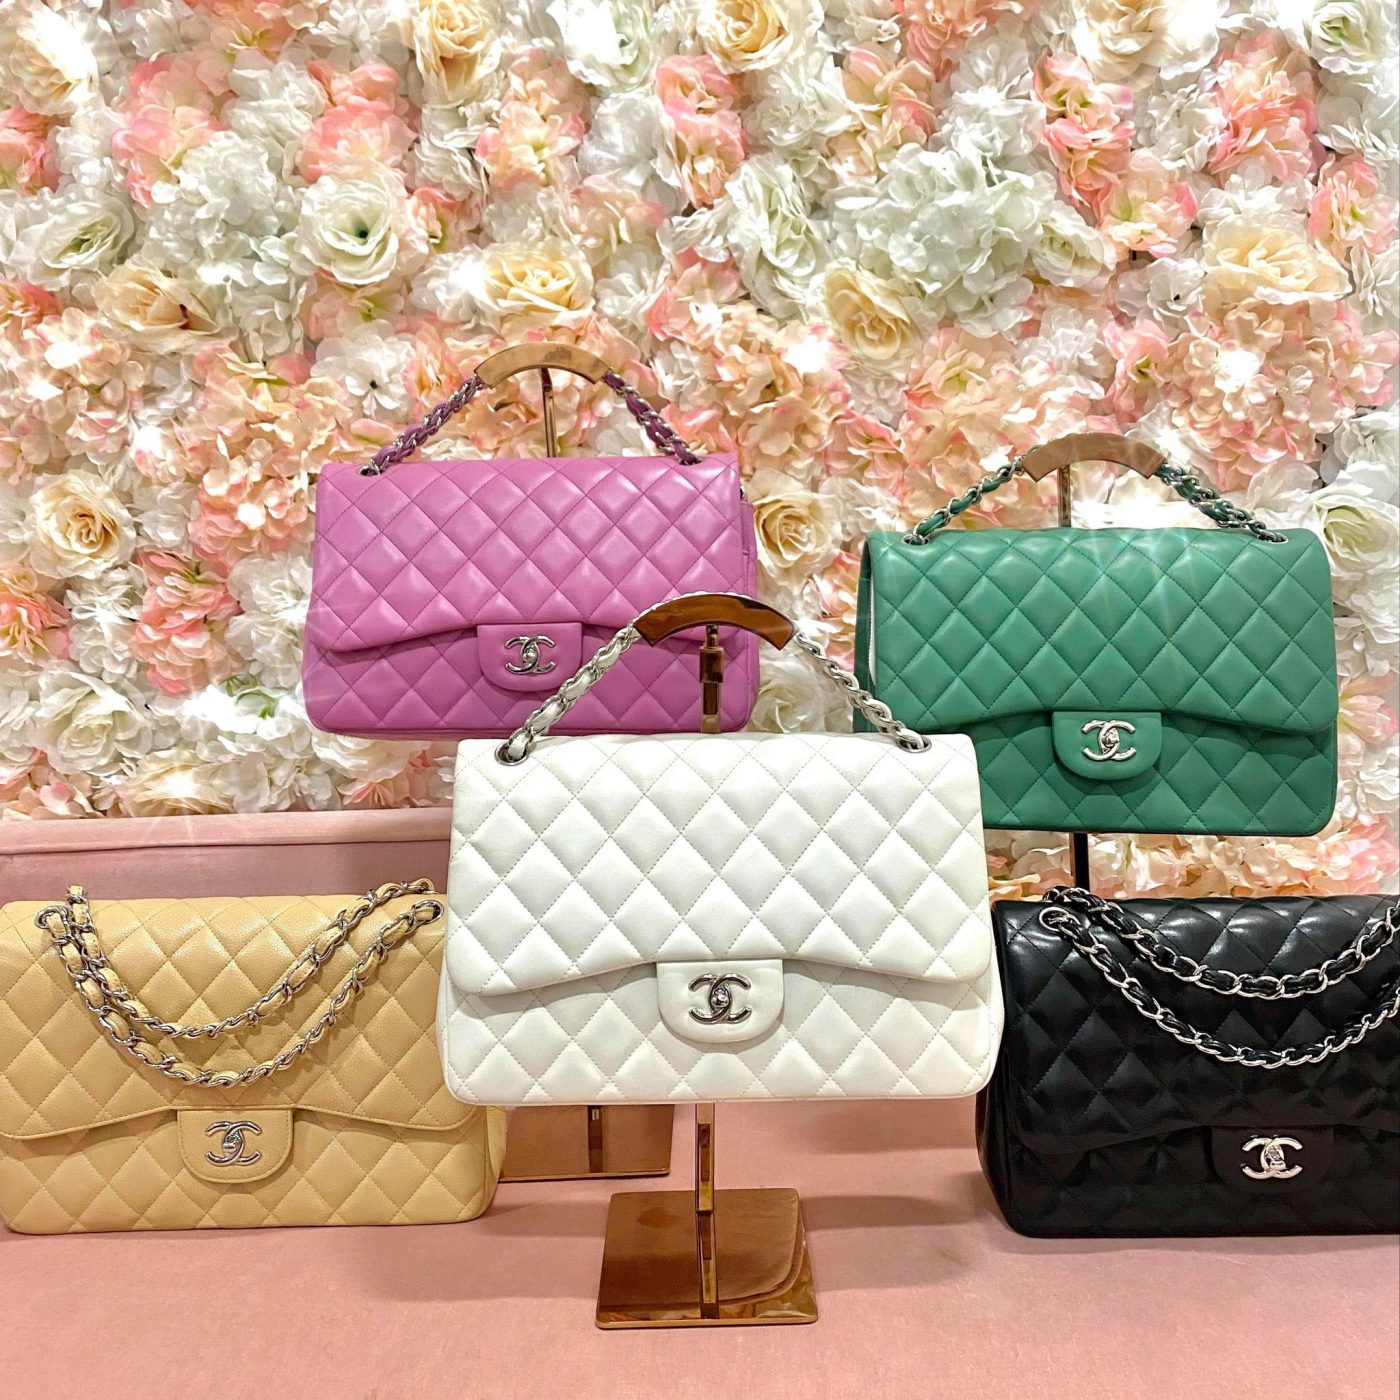 The online-only shop has a deep inventory of CHANEL BAGS.